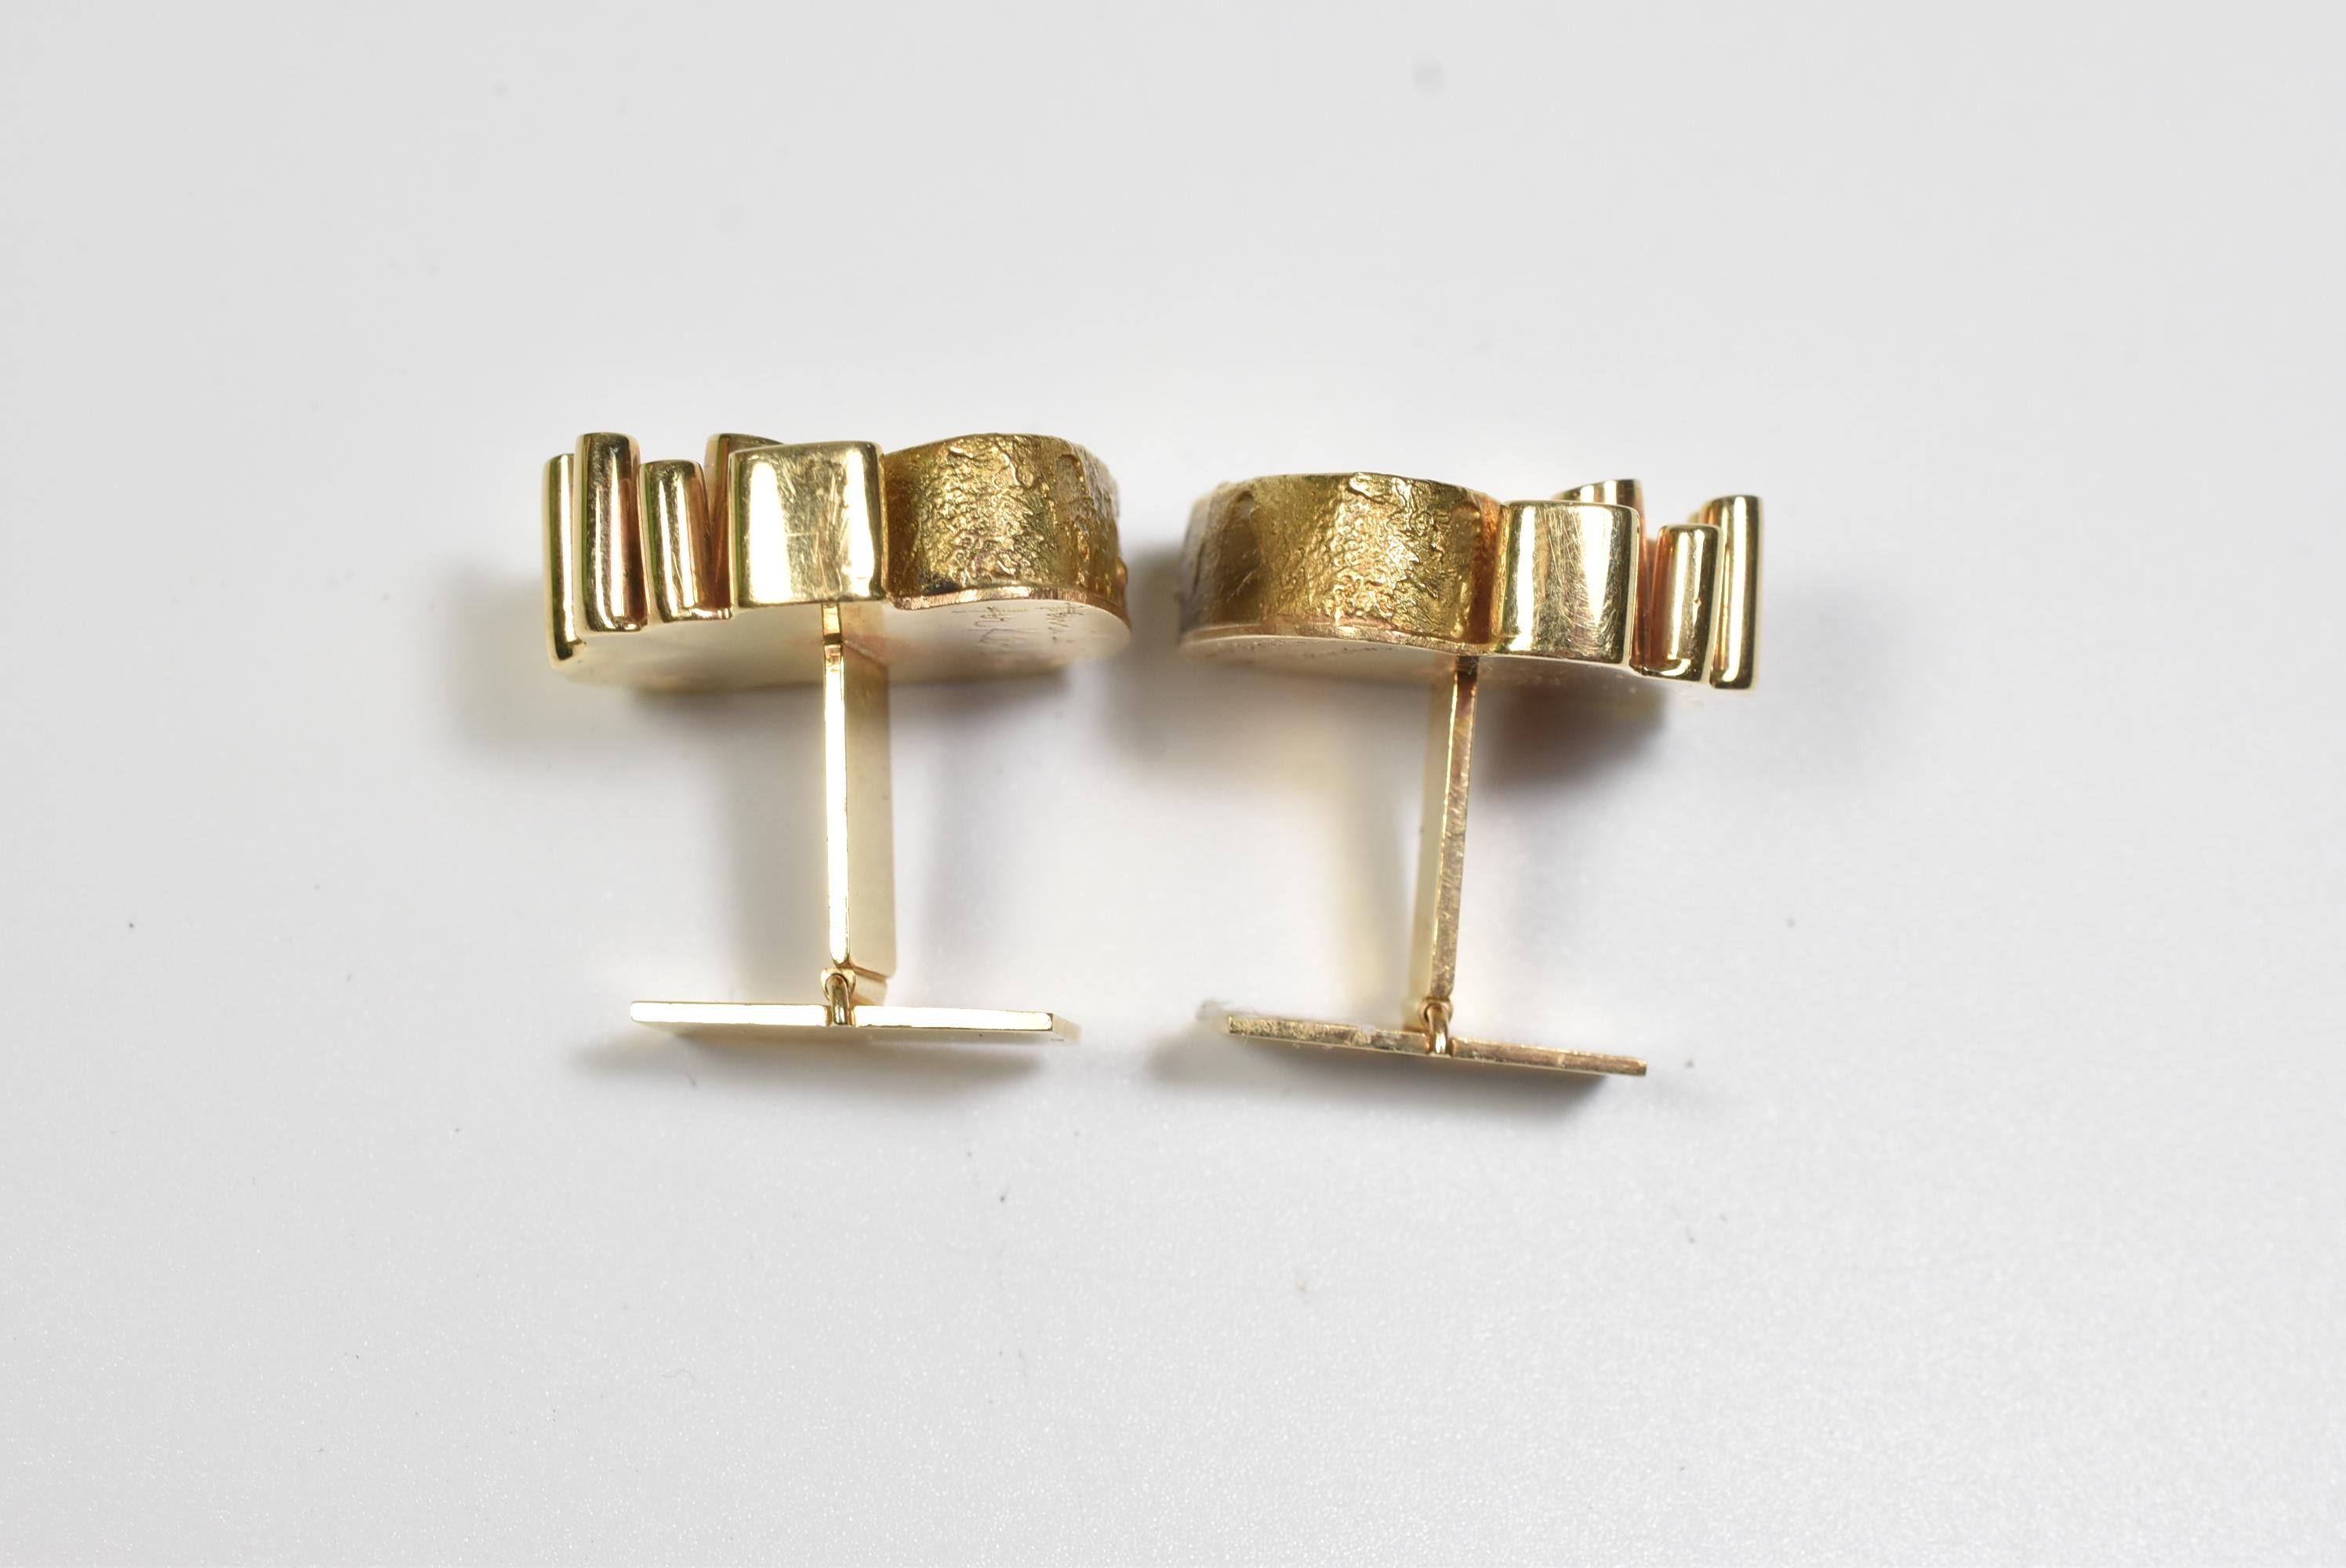 Henri Leighton for Kanam Mid-Century Modernist cufflinks, 14k gold polished and textured freeform cufflinks. Very minor wear, artist signed on the reverse. 22mm wide x 20mm long x 20mm deep. 21.7 grams total weight.